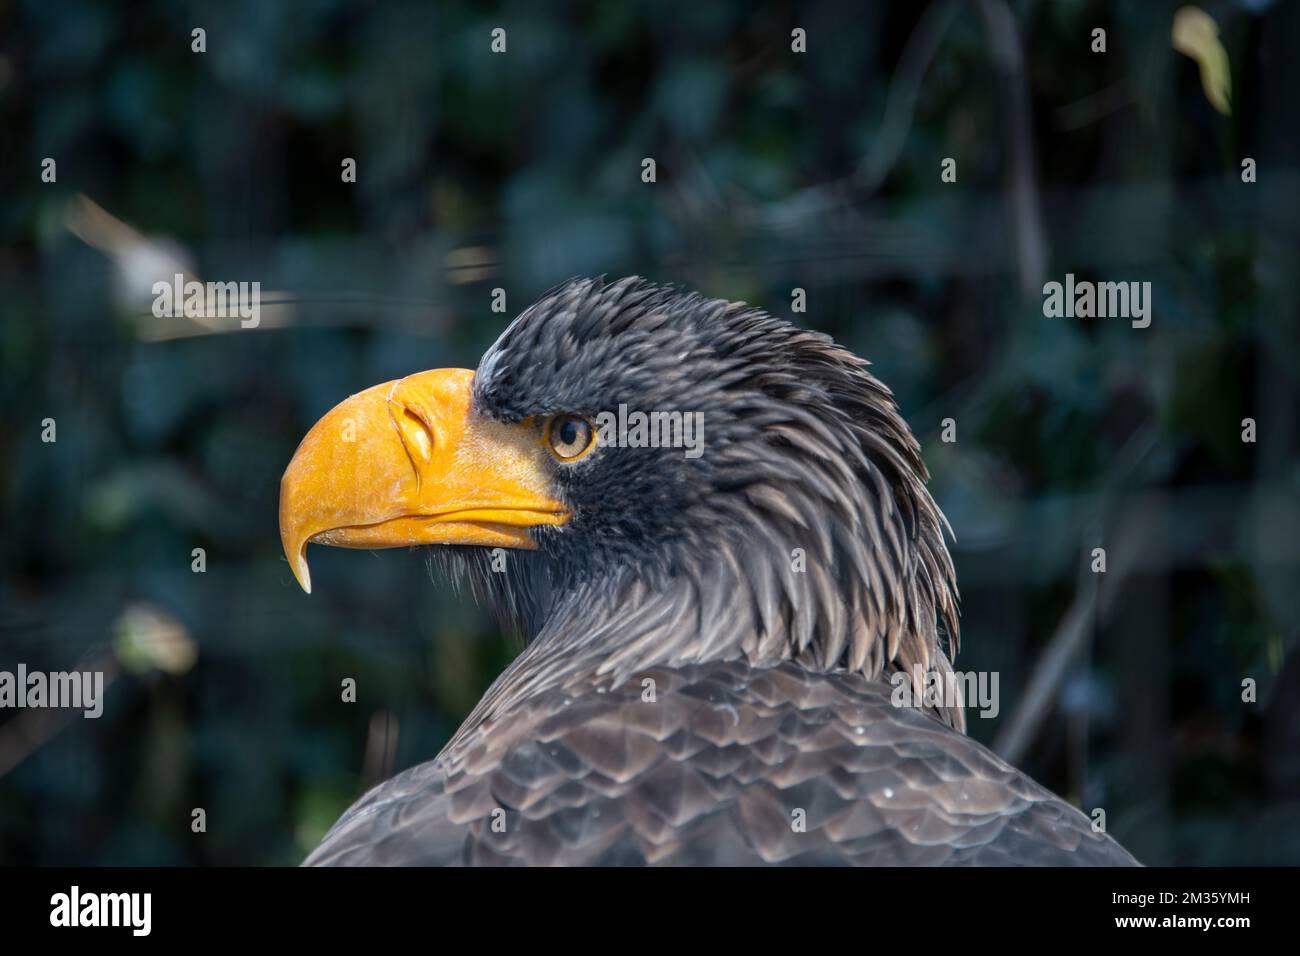 Headshot of an eagle with black feathers and yellow beak Stock Photo